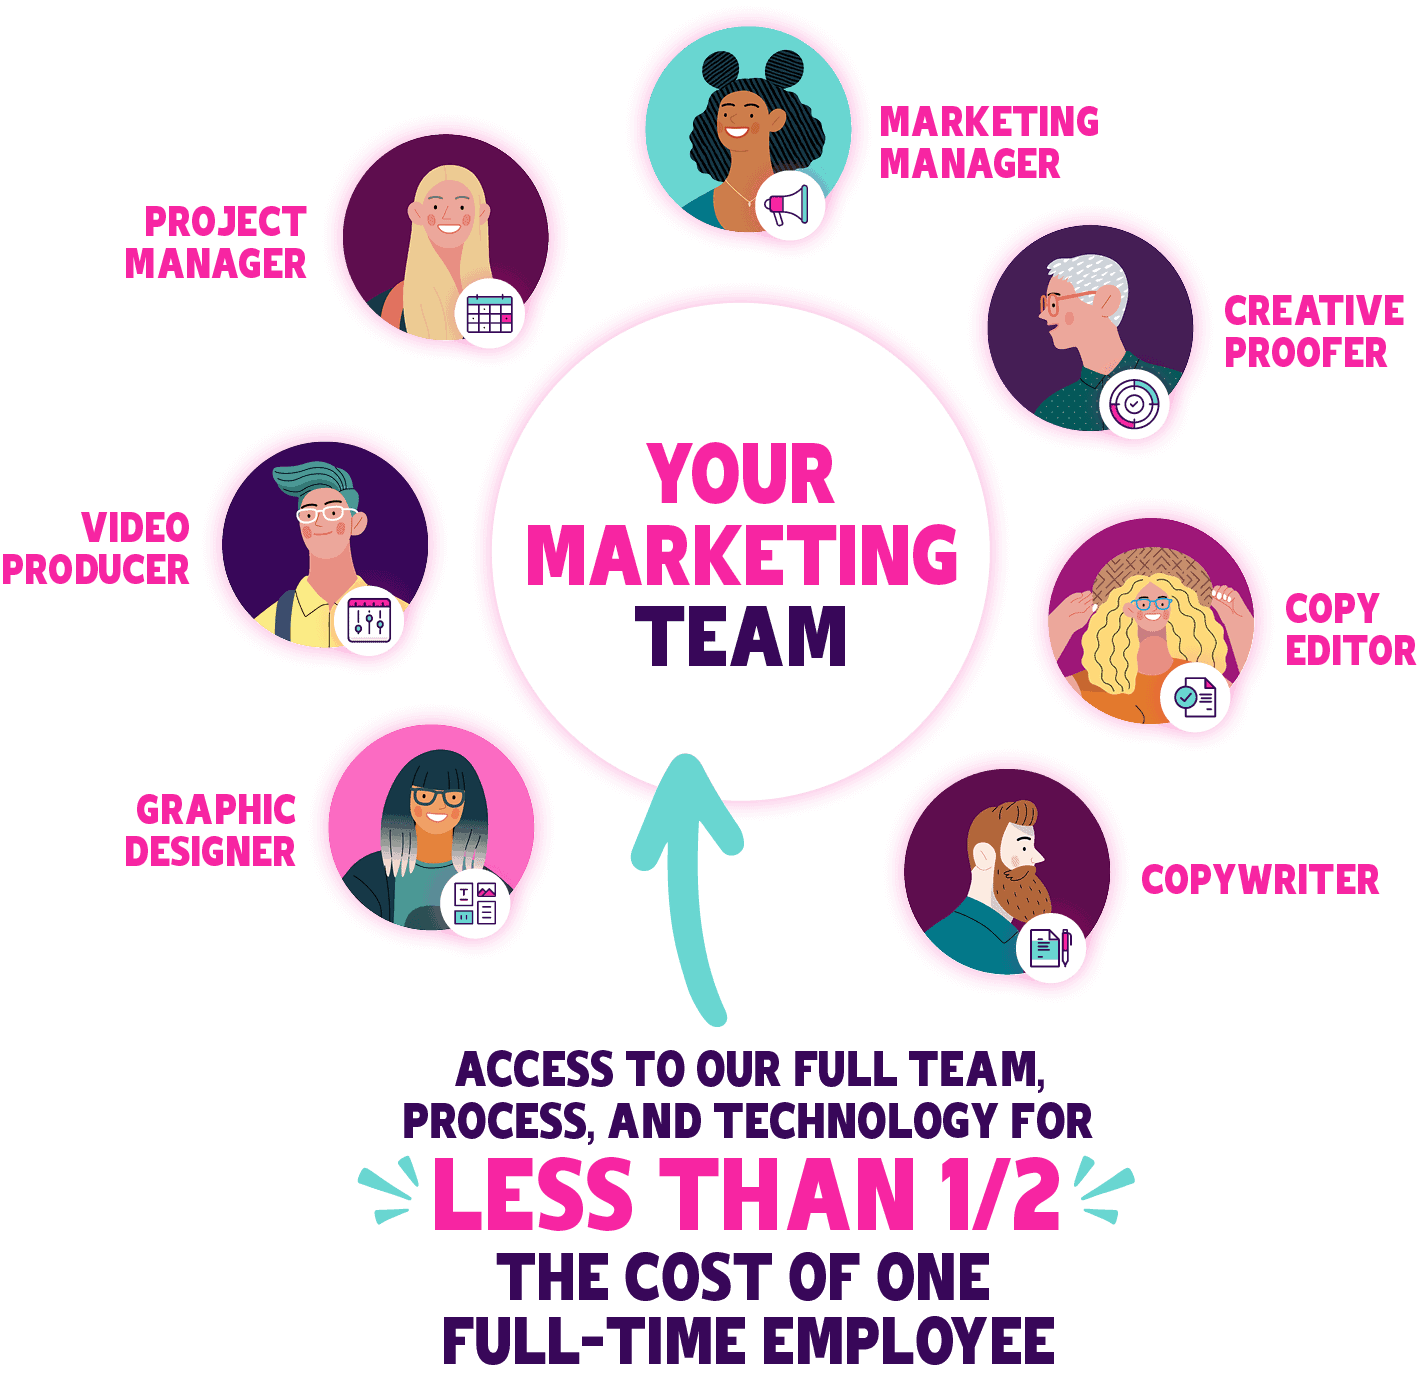 Your Marketing Team - Access to our full team, process, and technology for less than 1/2 the cost of one Full-Time Employee